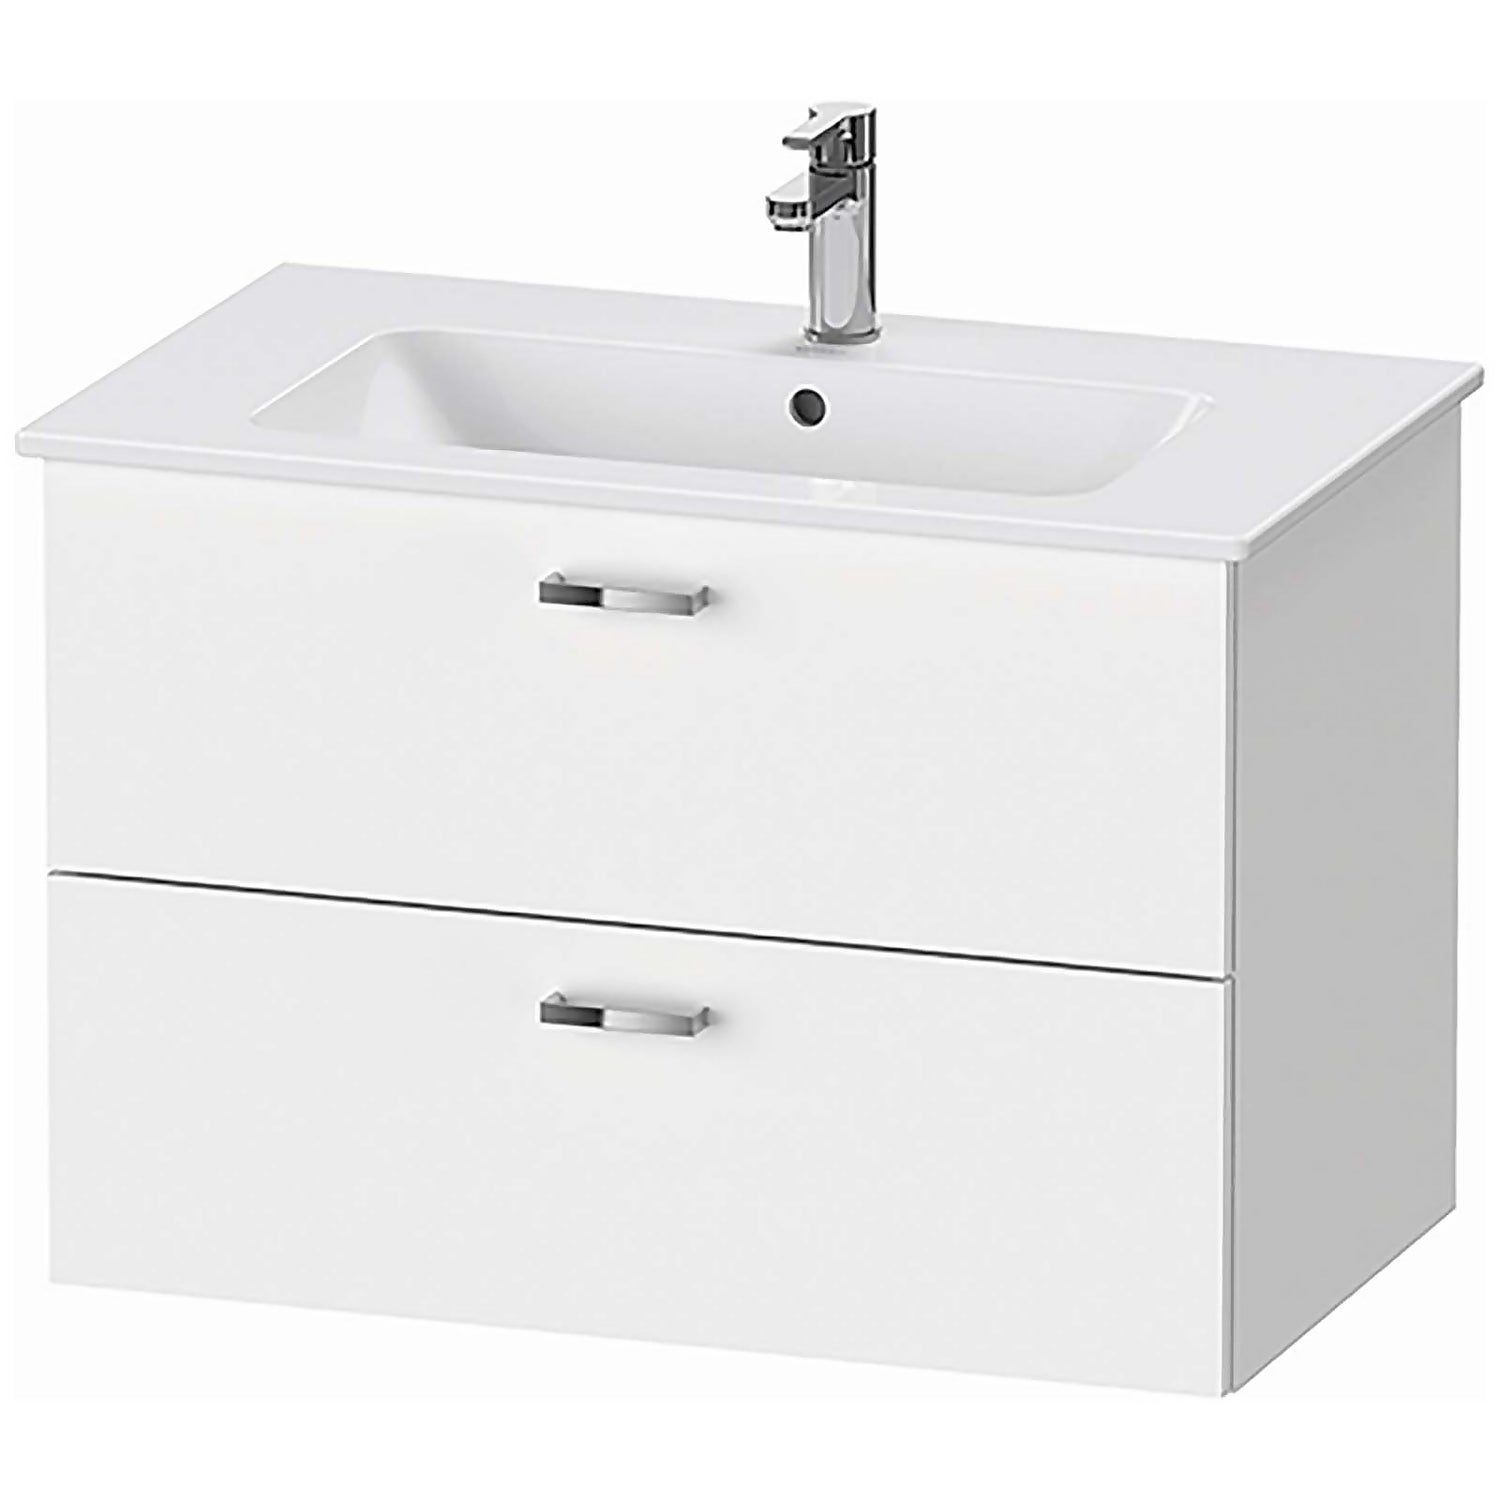 Duravit Xbase 800mm Wall Mounted Vanity Unit with Basin - White